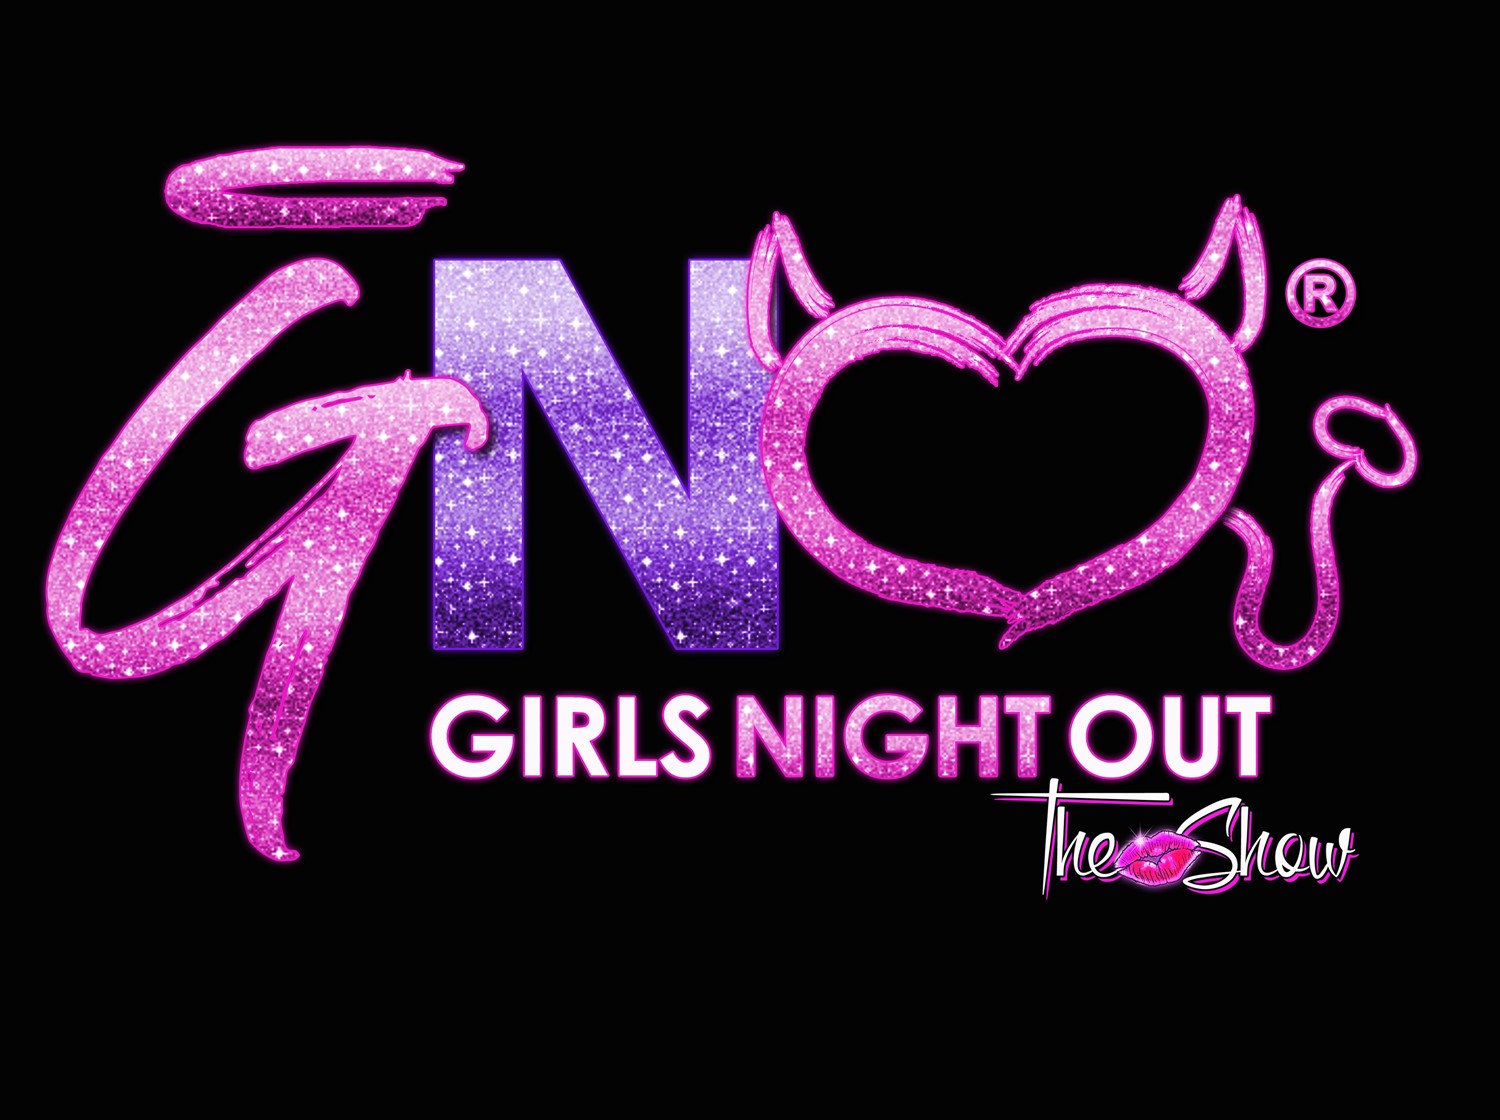 Ellie Ray's (21+) Branford, FL on May 22, 20:00@Ellie Ray's RV Resort & Lounge - Buy tickets and Get information on Girls Night Out the Show tickets.girlsnightouttheshow.com